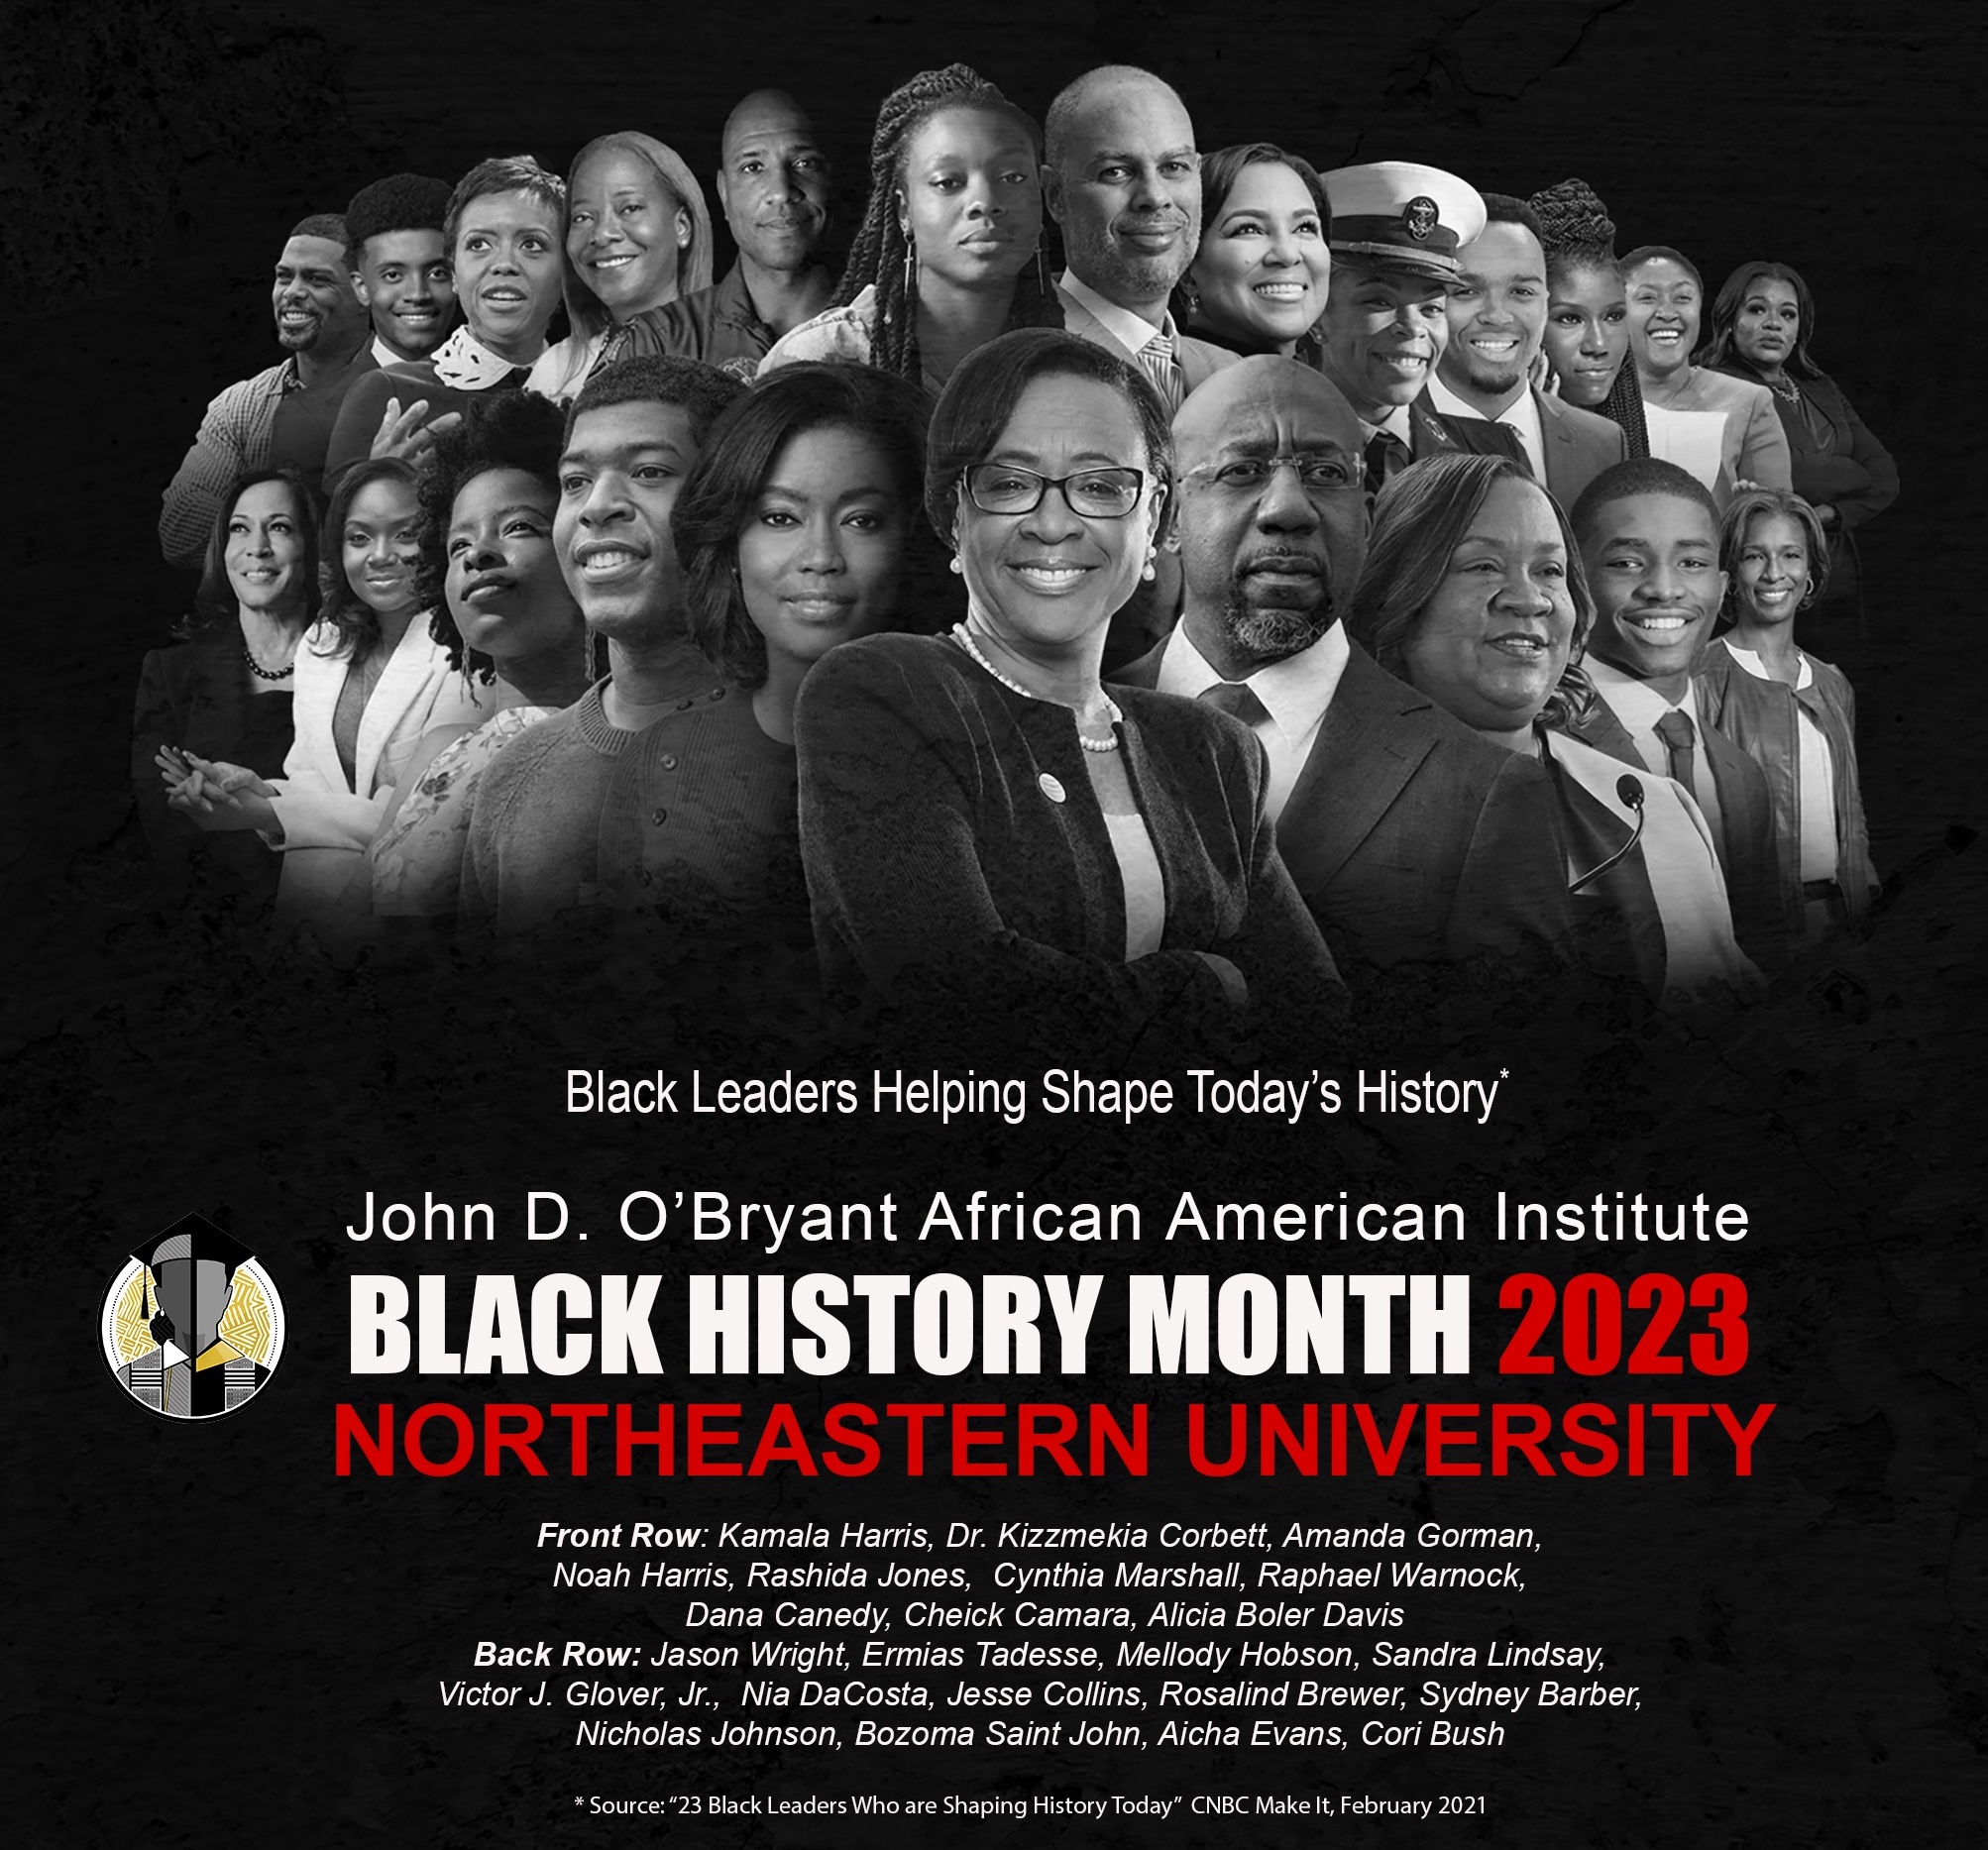 Black History Month 2023 African American Institute